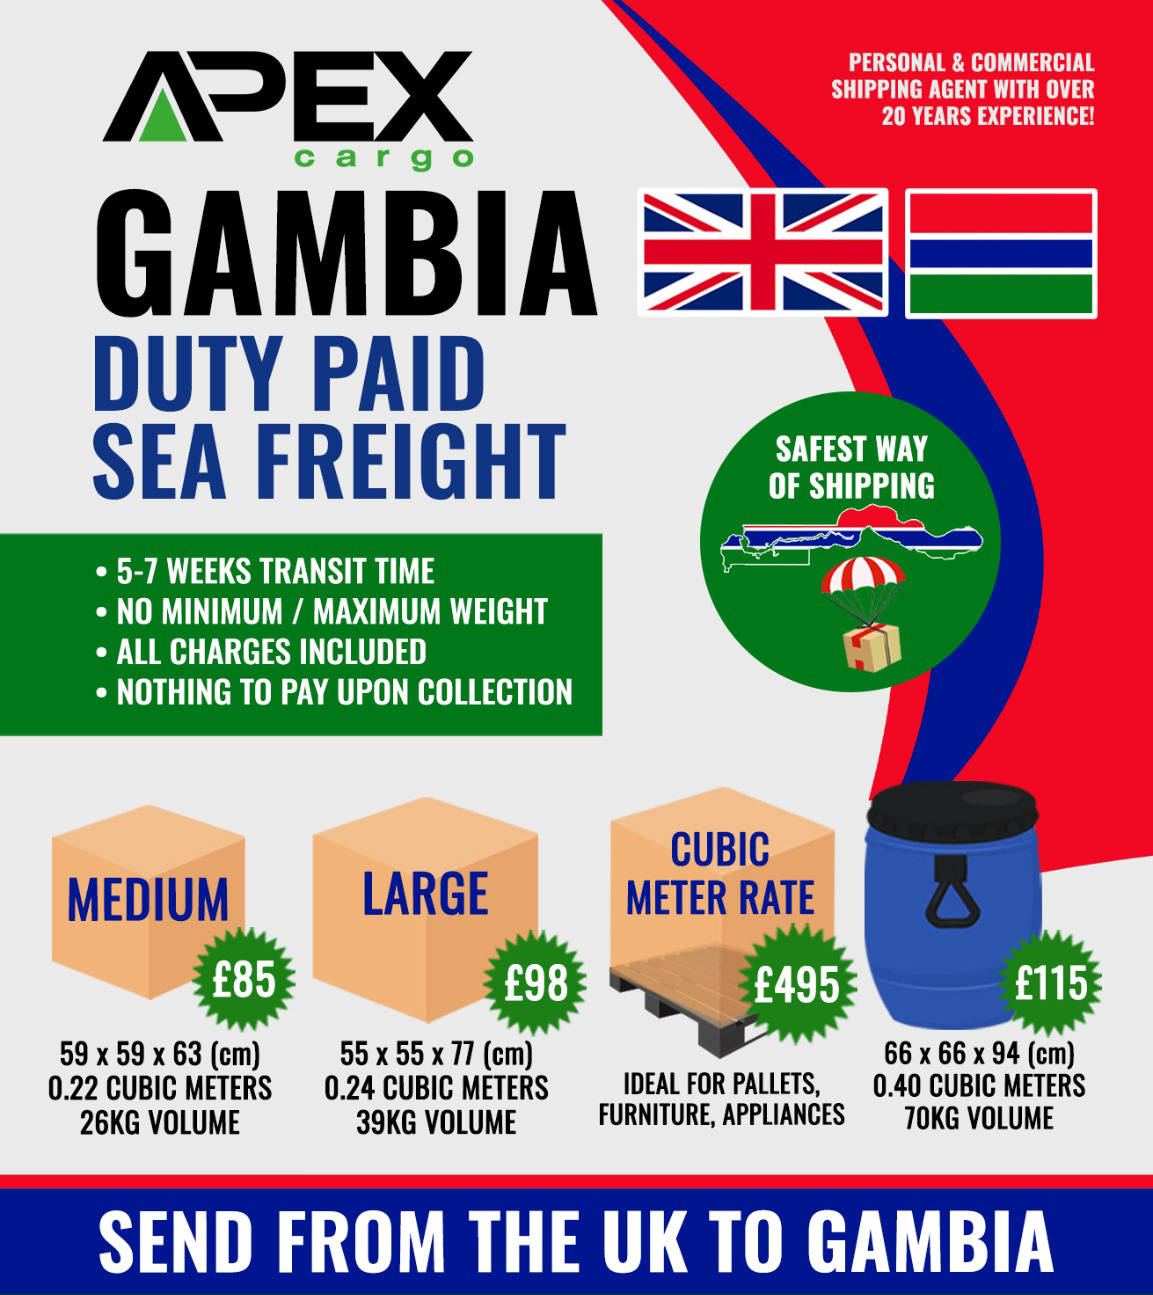 Sea Freight Duty Paid Services